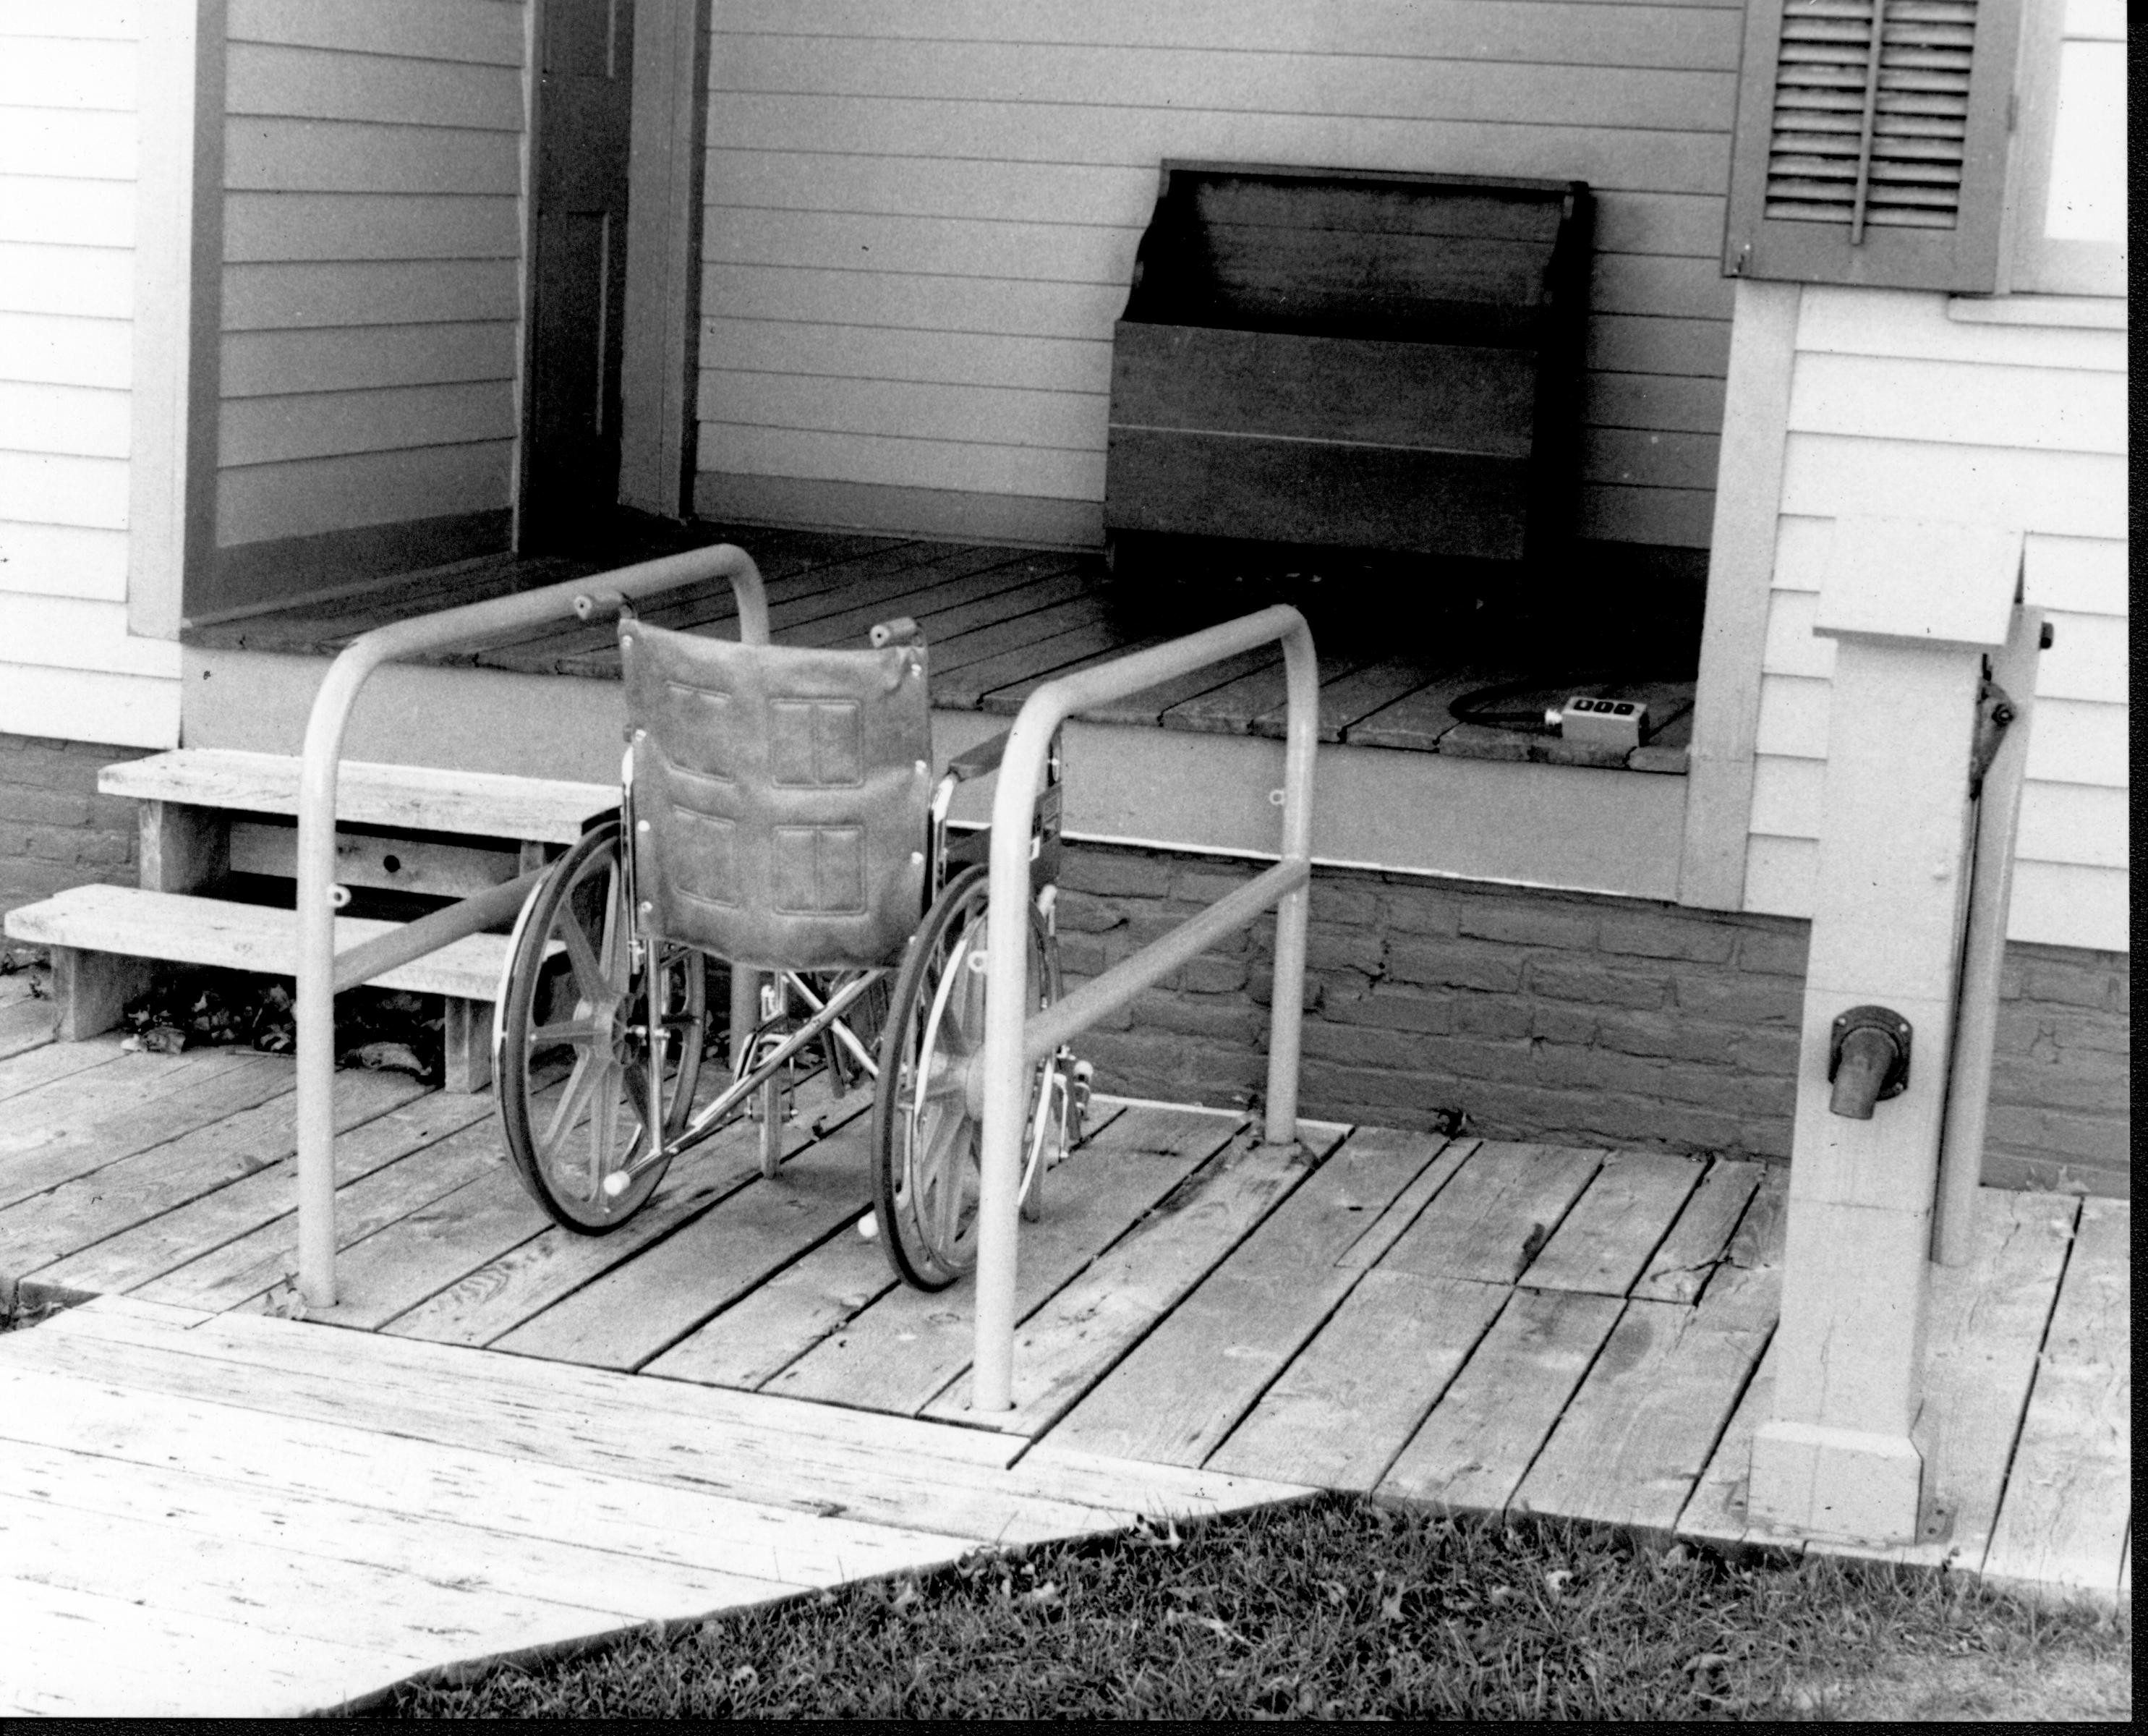 Lincoln Home wheelchair lift, fully retracted, with empty wheelchair. Photographer facing southlincoln west.